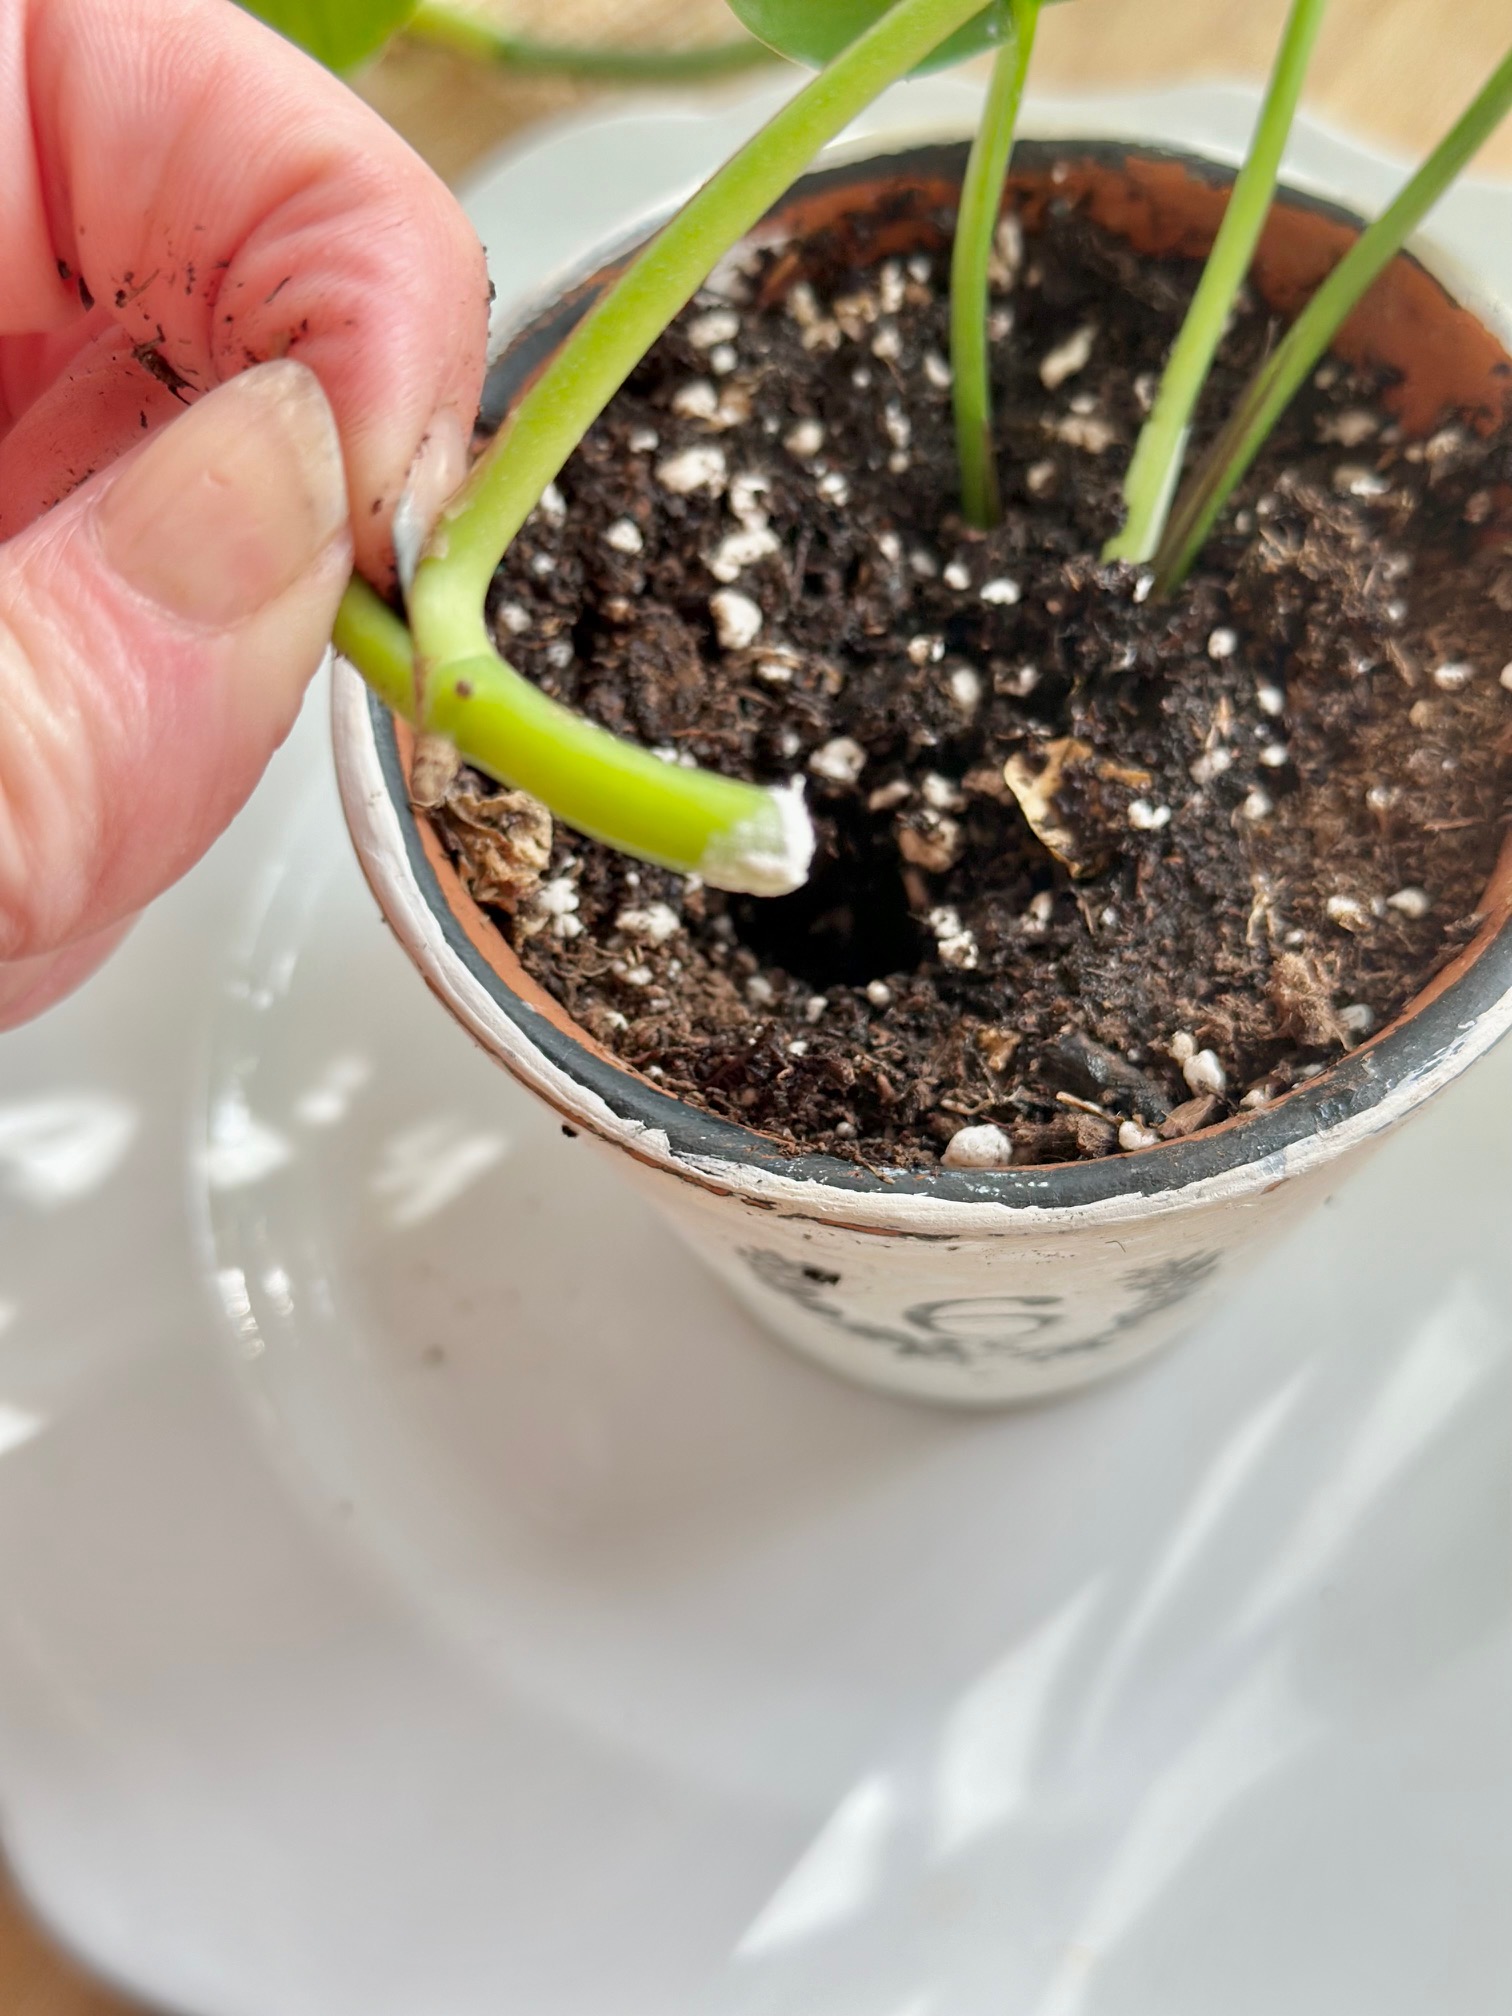 placing a root in soil in a small pot. 